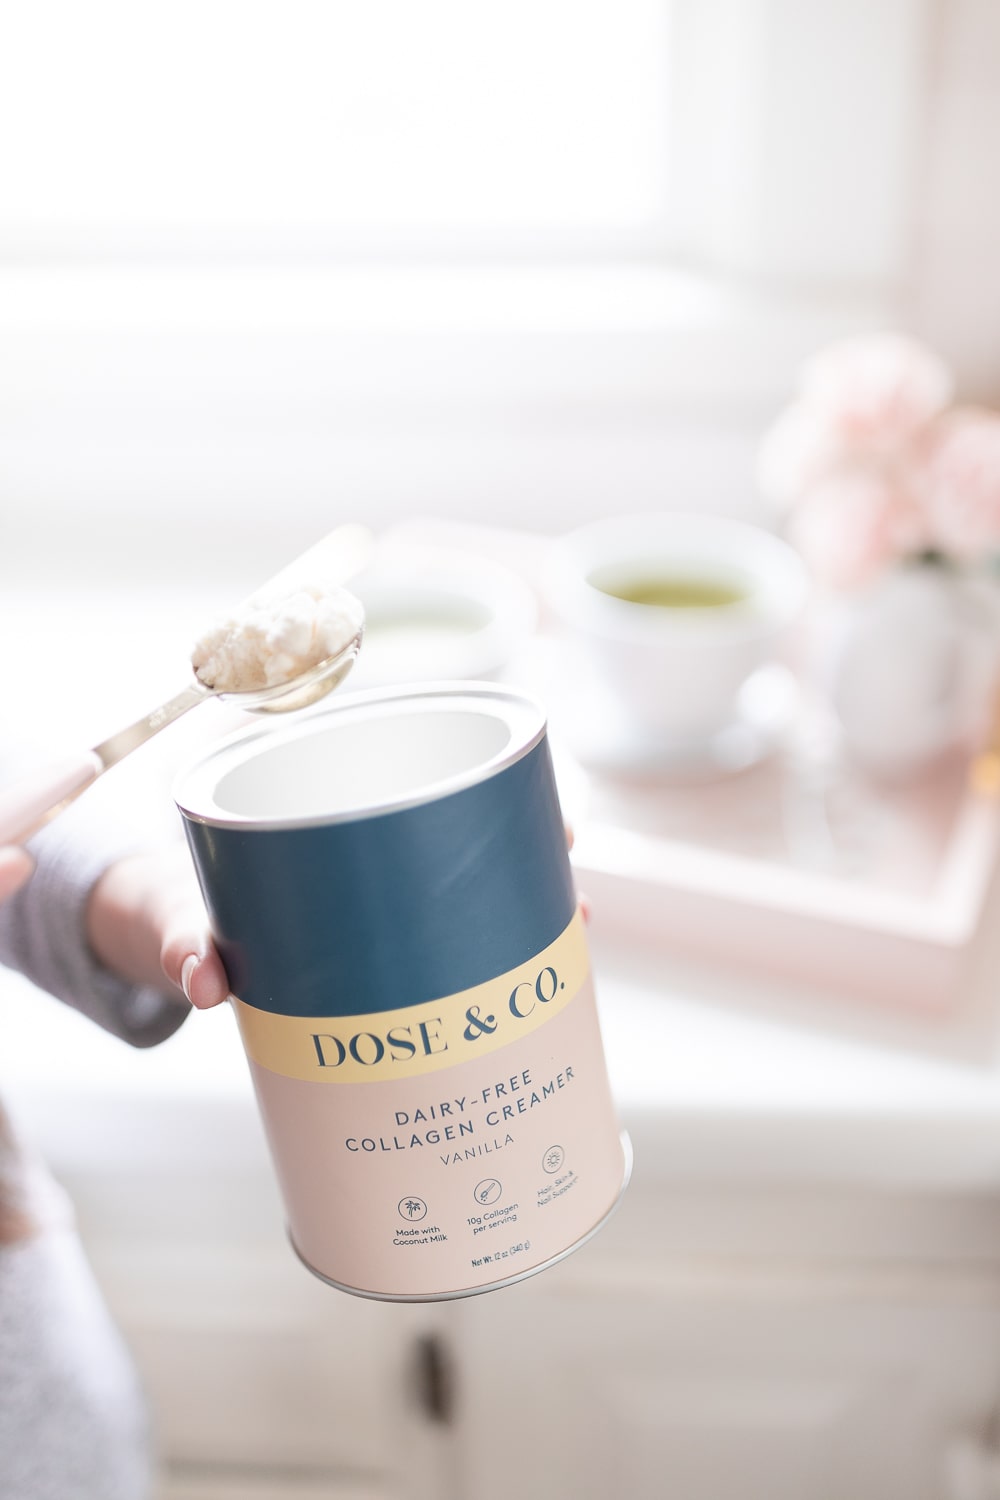 Blogger Stephanie Ziajka puts Dose & Co Vanilla Dairy-Free Collagen Creamer in her hot matcha latte on Diary of a Debutante